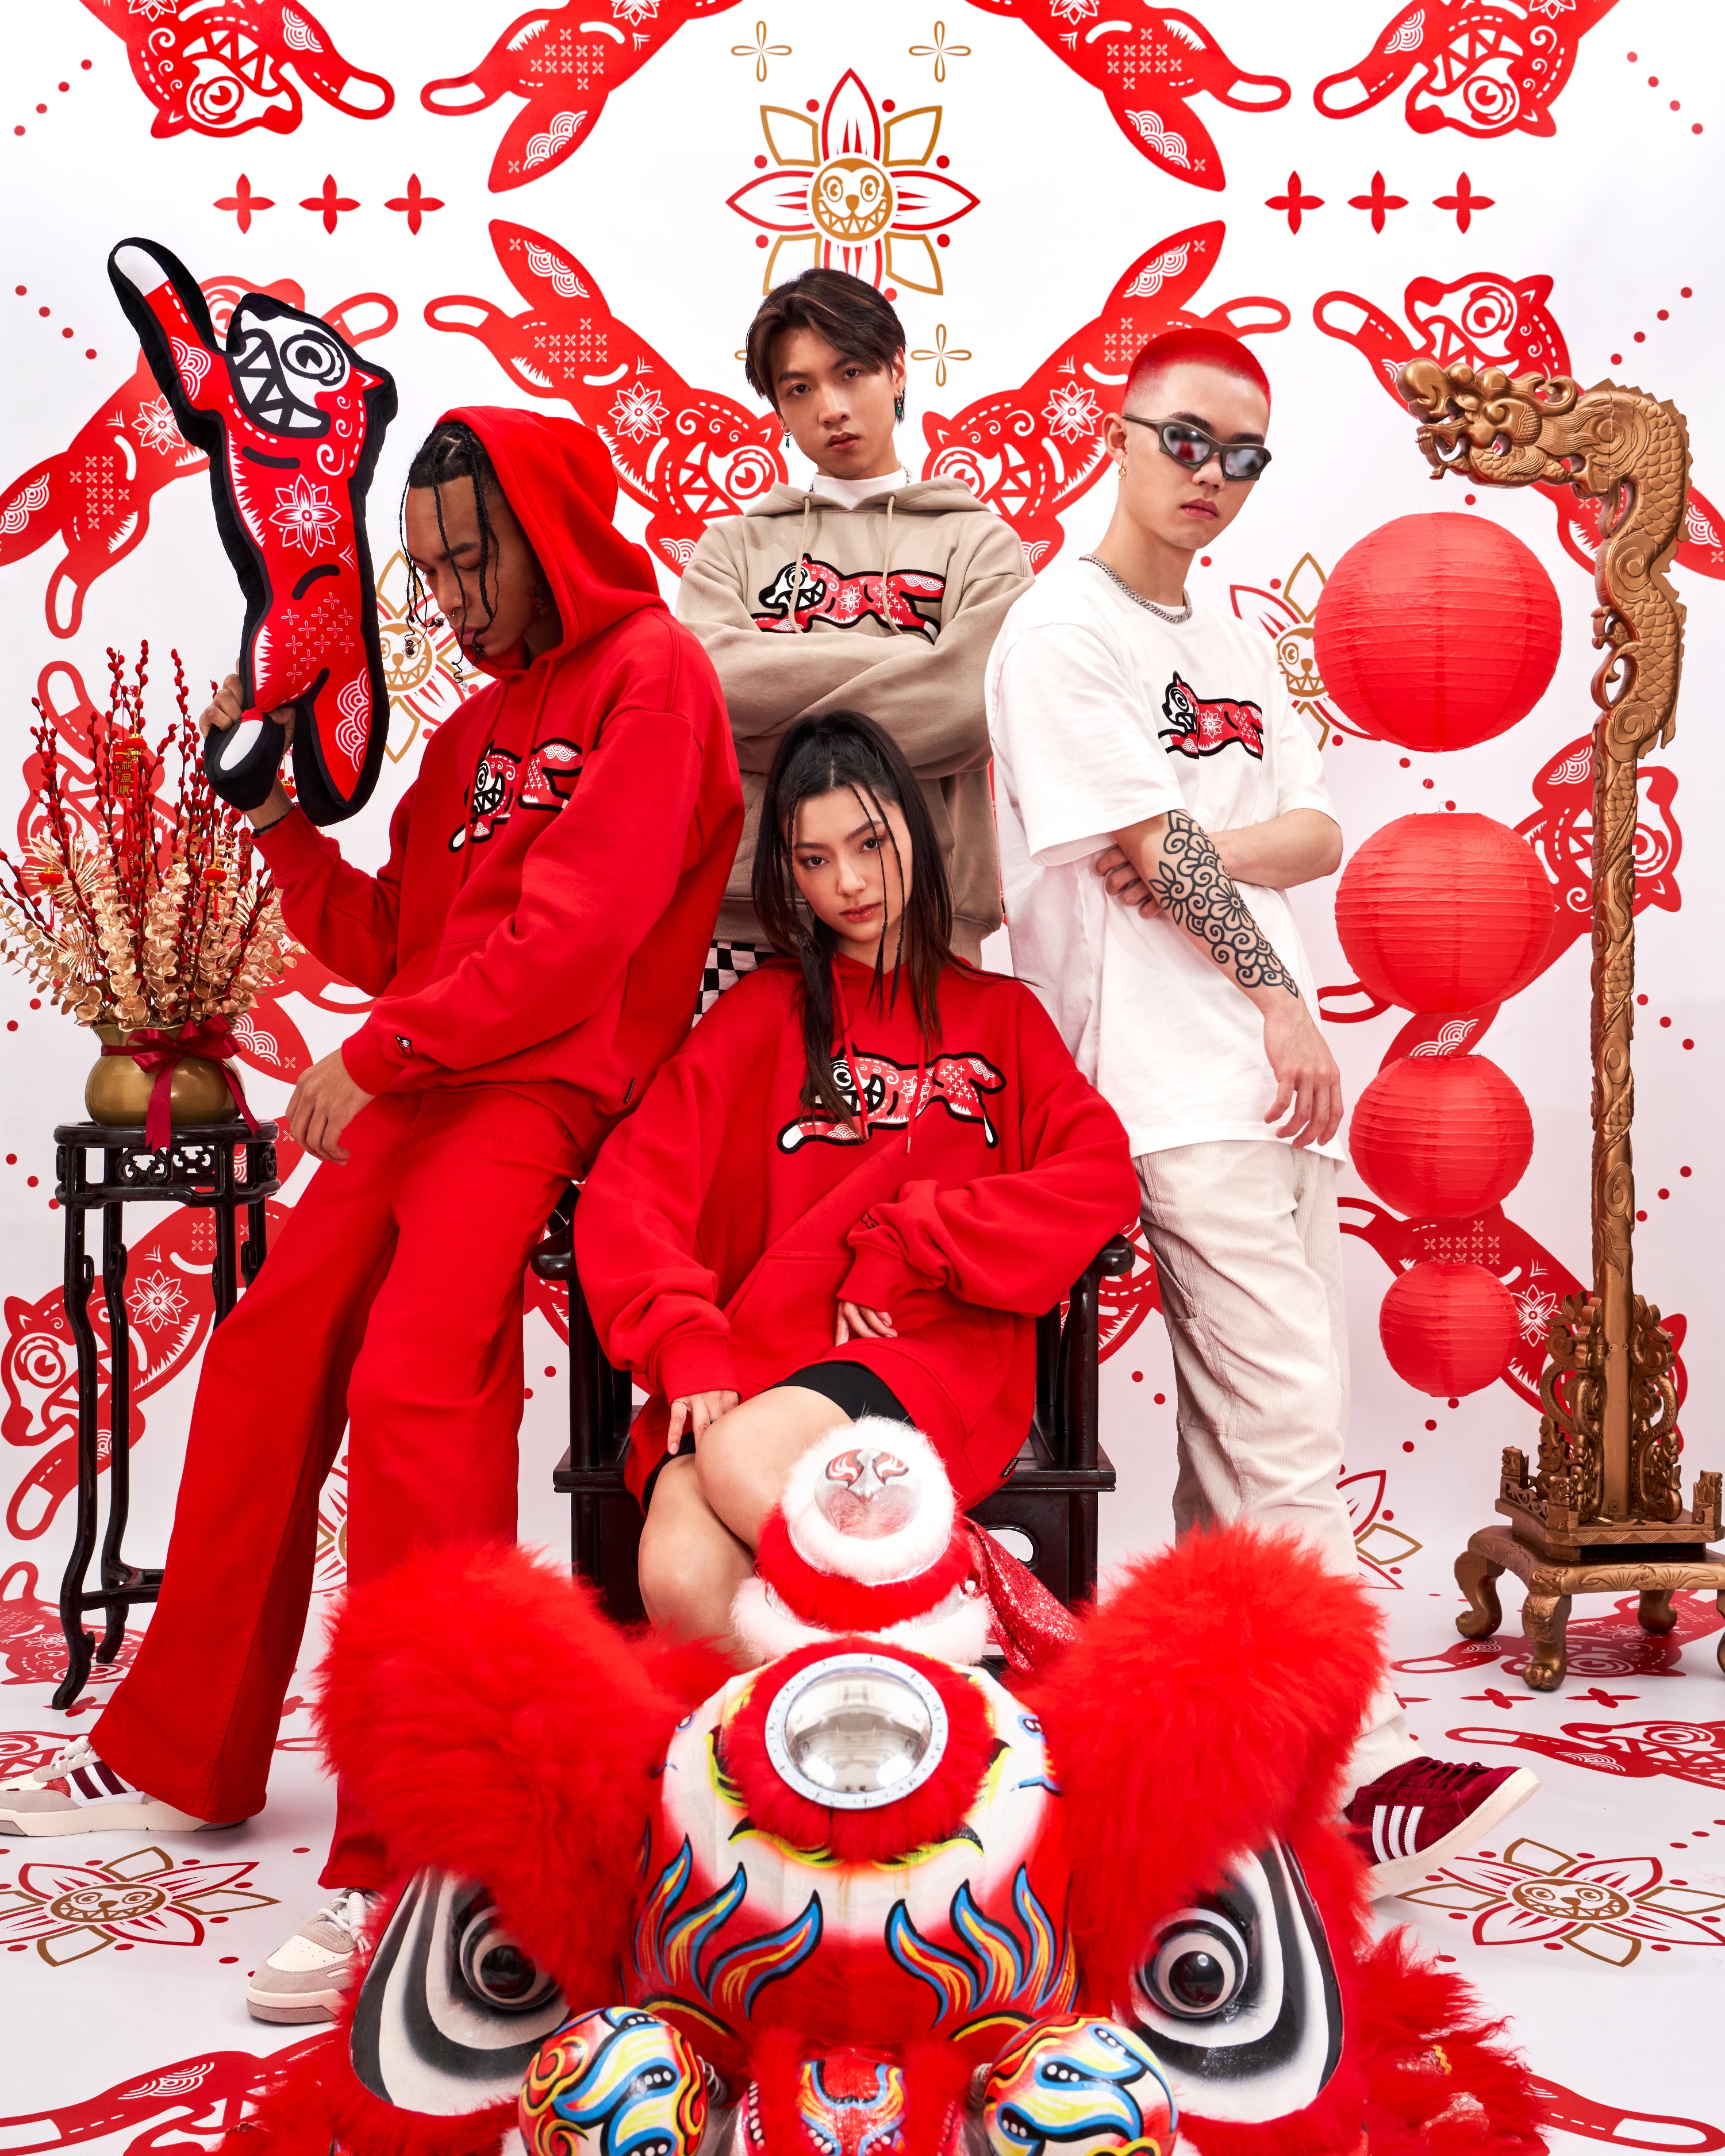 BBC ICECREAM Celebrates Year of the Rabbit With a Lunar New Year Edition